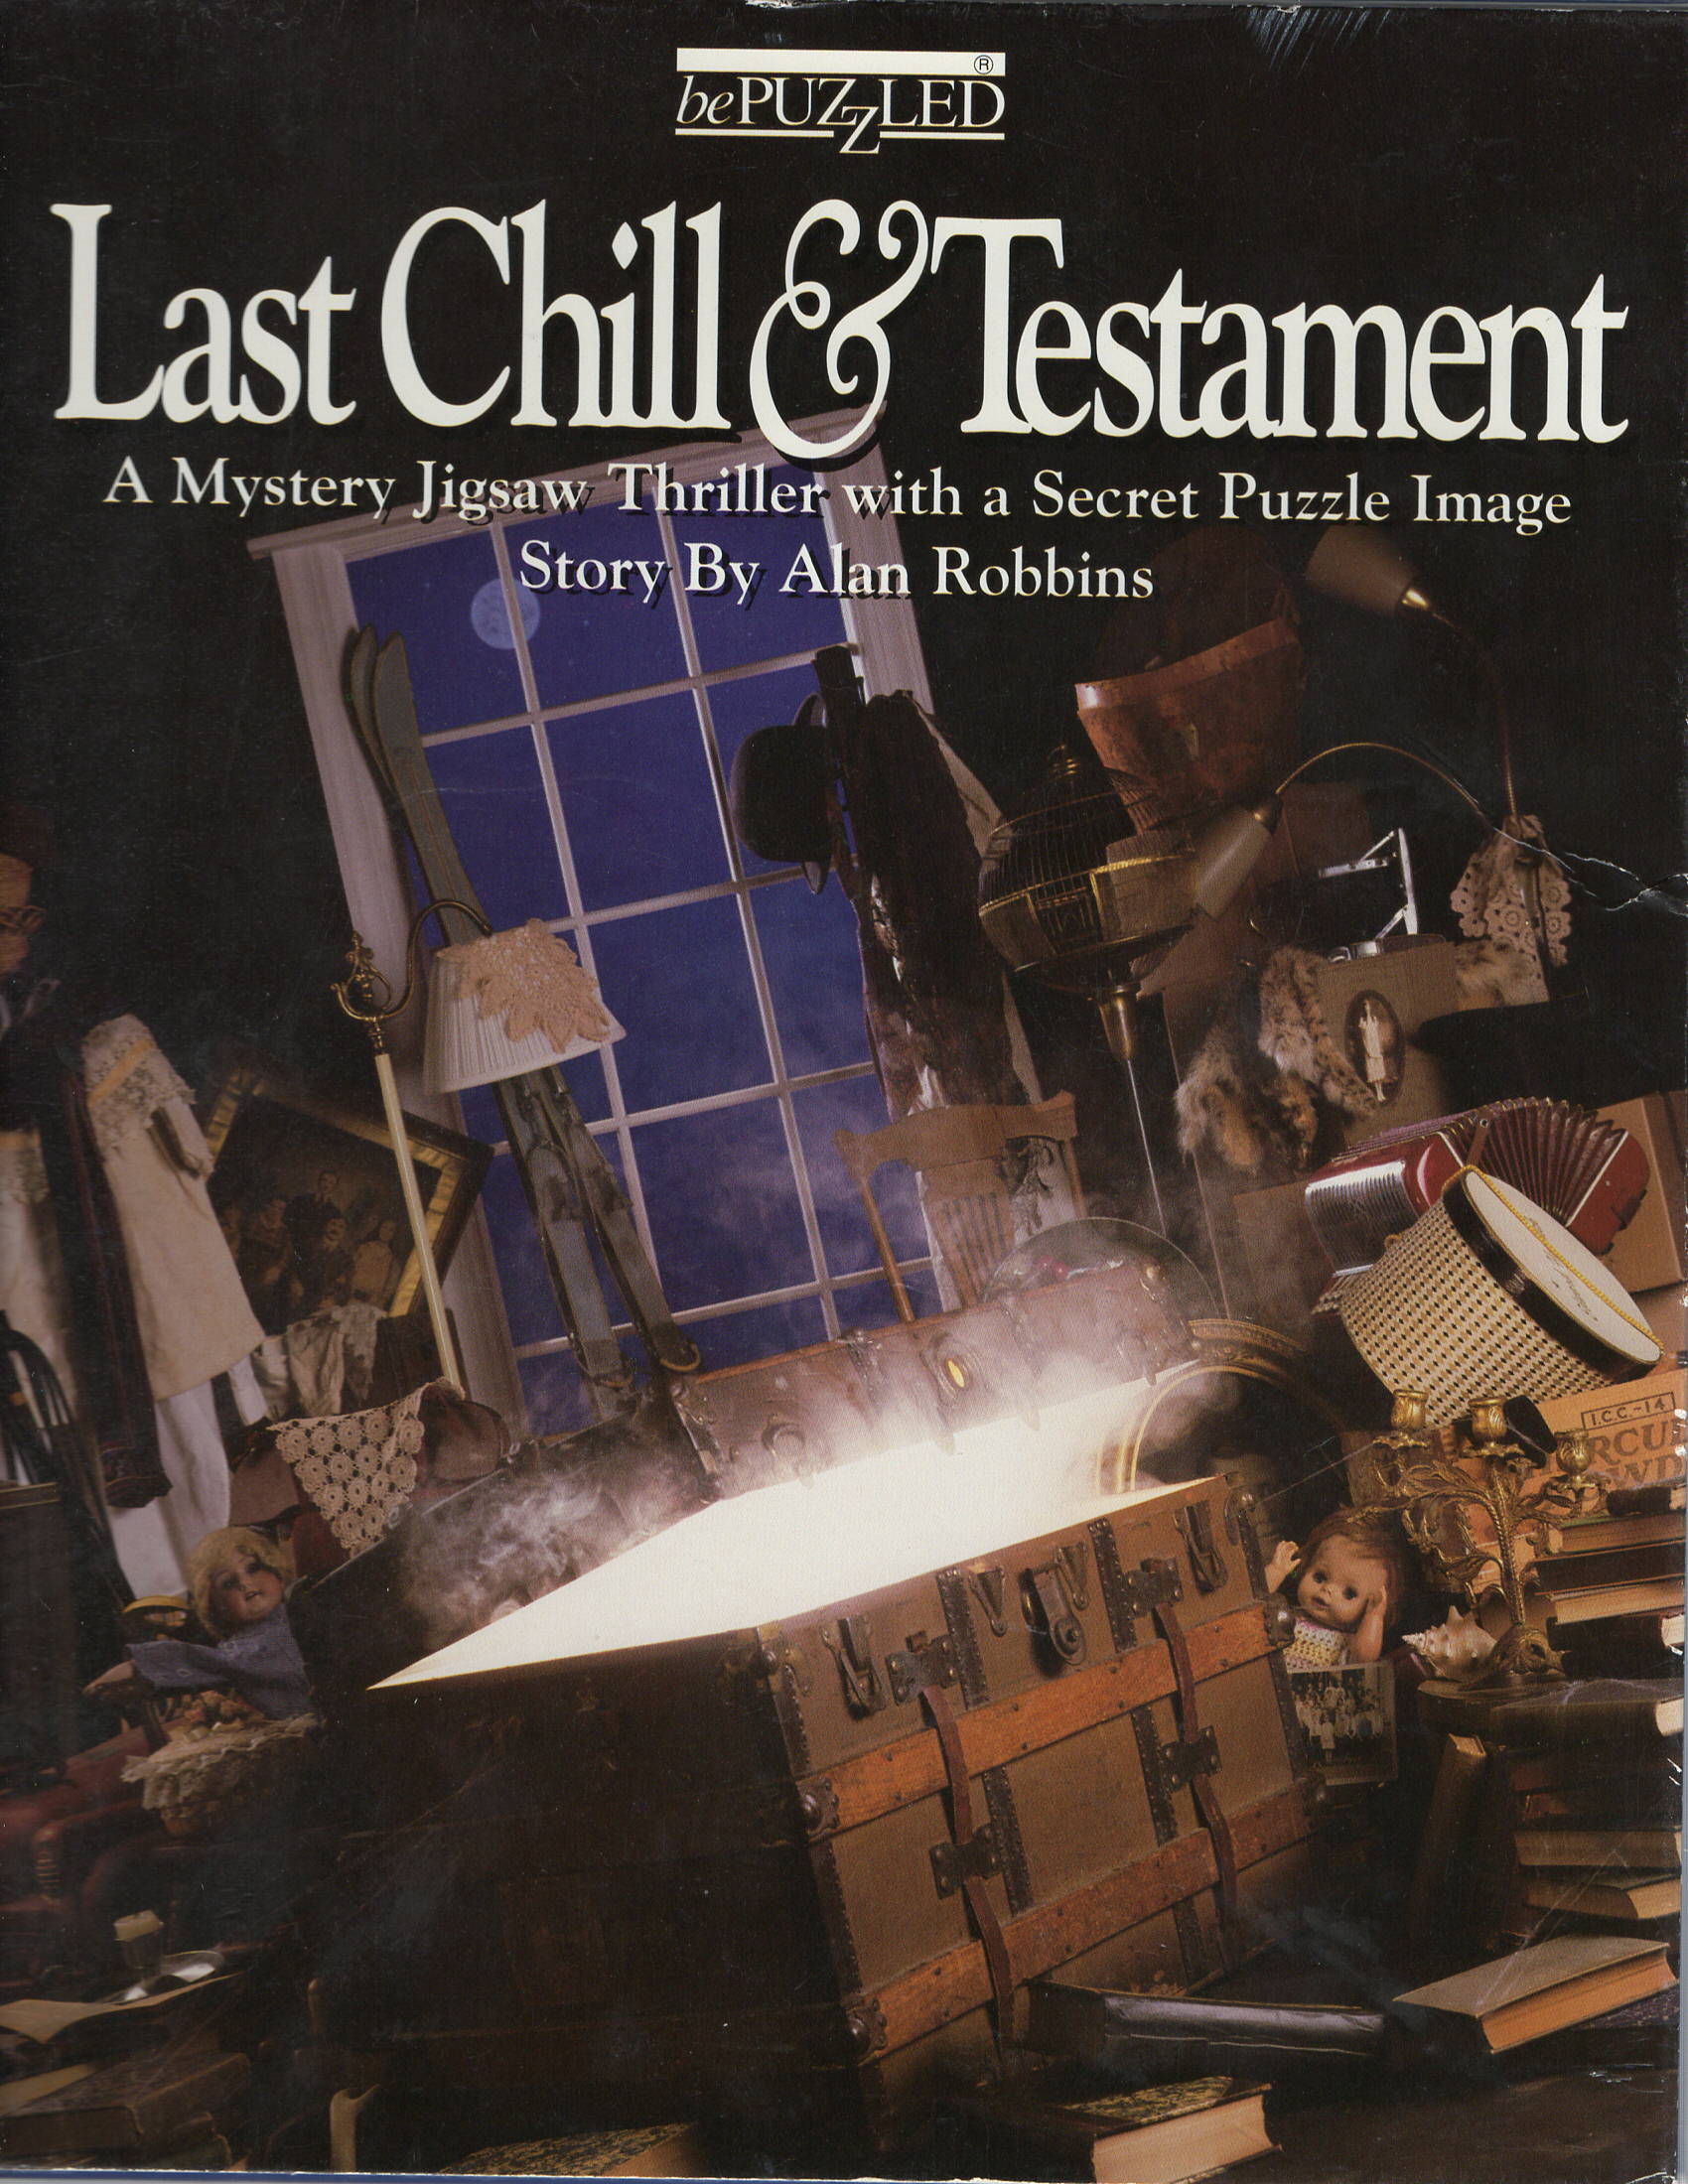 Rental - BePuzzled 1000: Last Chill and Testament - Conundrum House